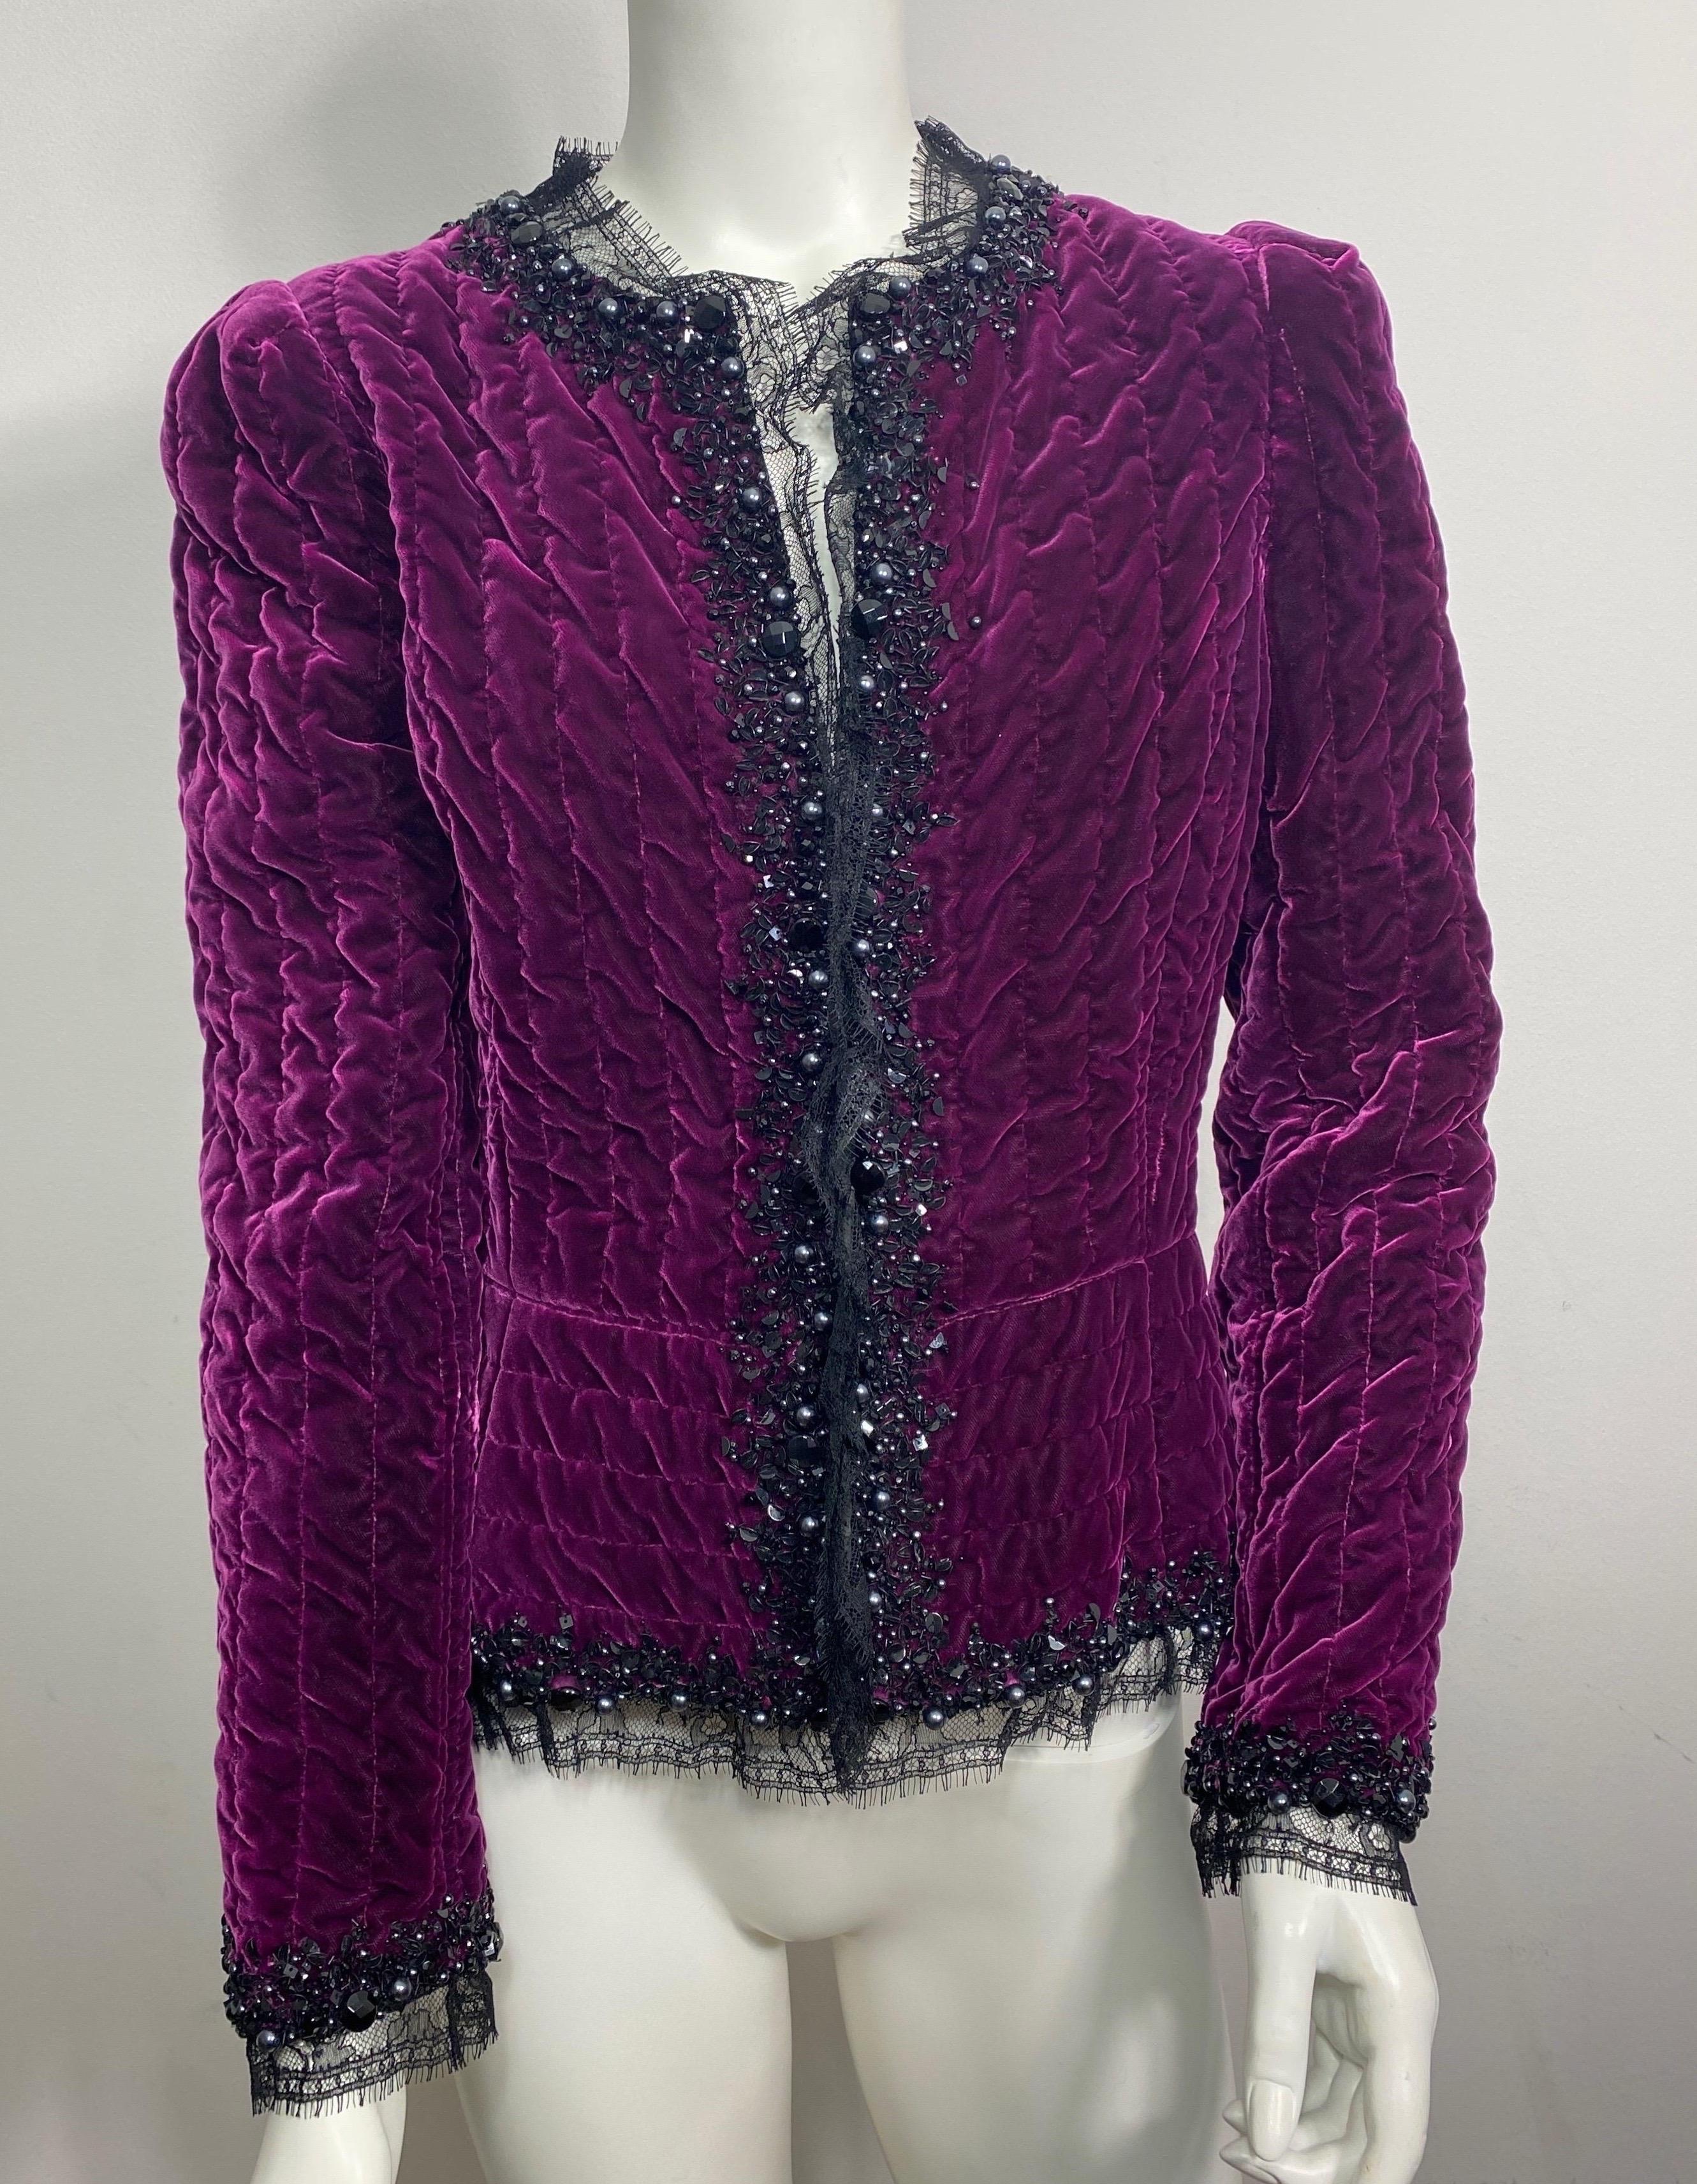 Oscar de la Renta Wine Quilted Velvet Jacket - Size 8   This gorgeous Oscar de la Renta evening jacket would be an amazing addition to any Oscar lovers out there. The jacket is full lined in black silk, is made of a beautiful wine/cherry colored